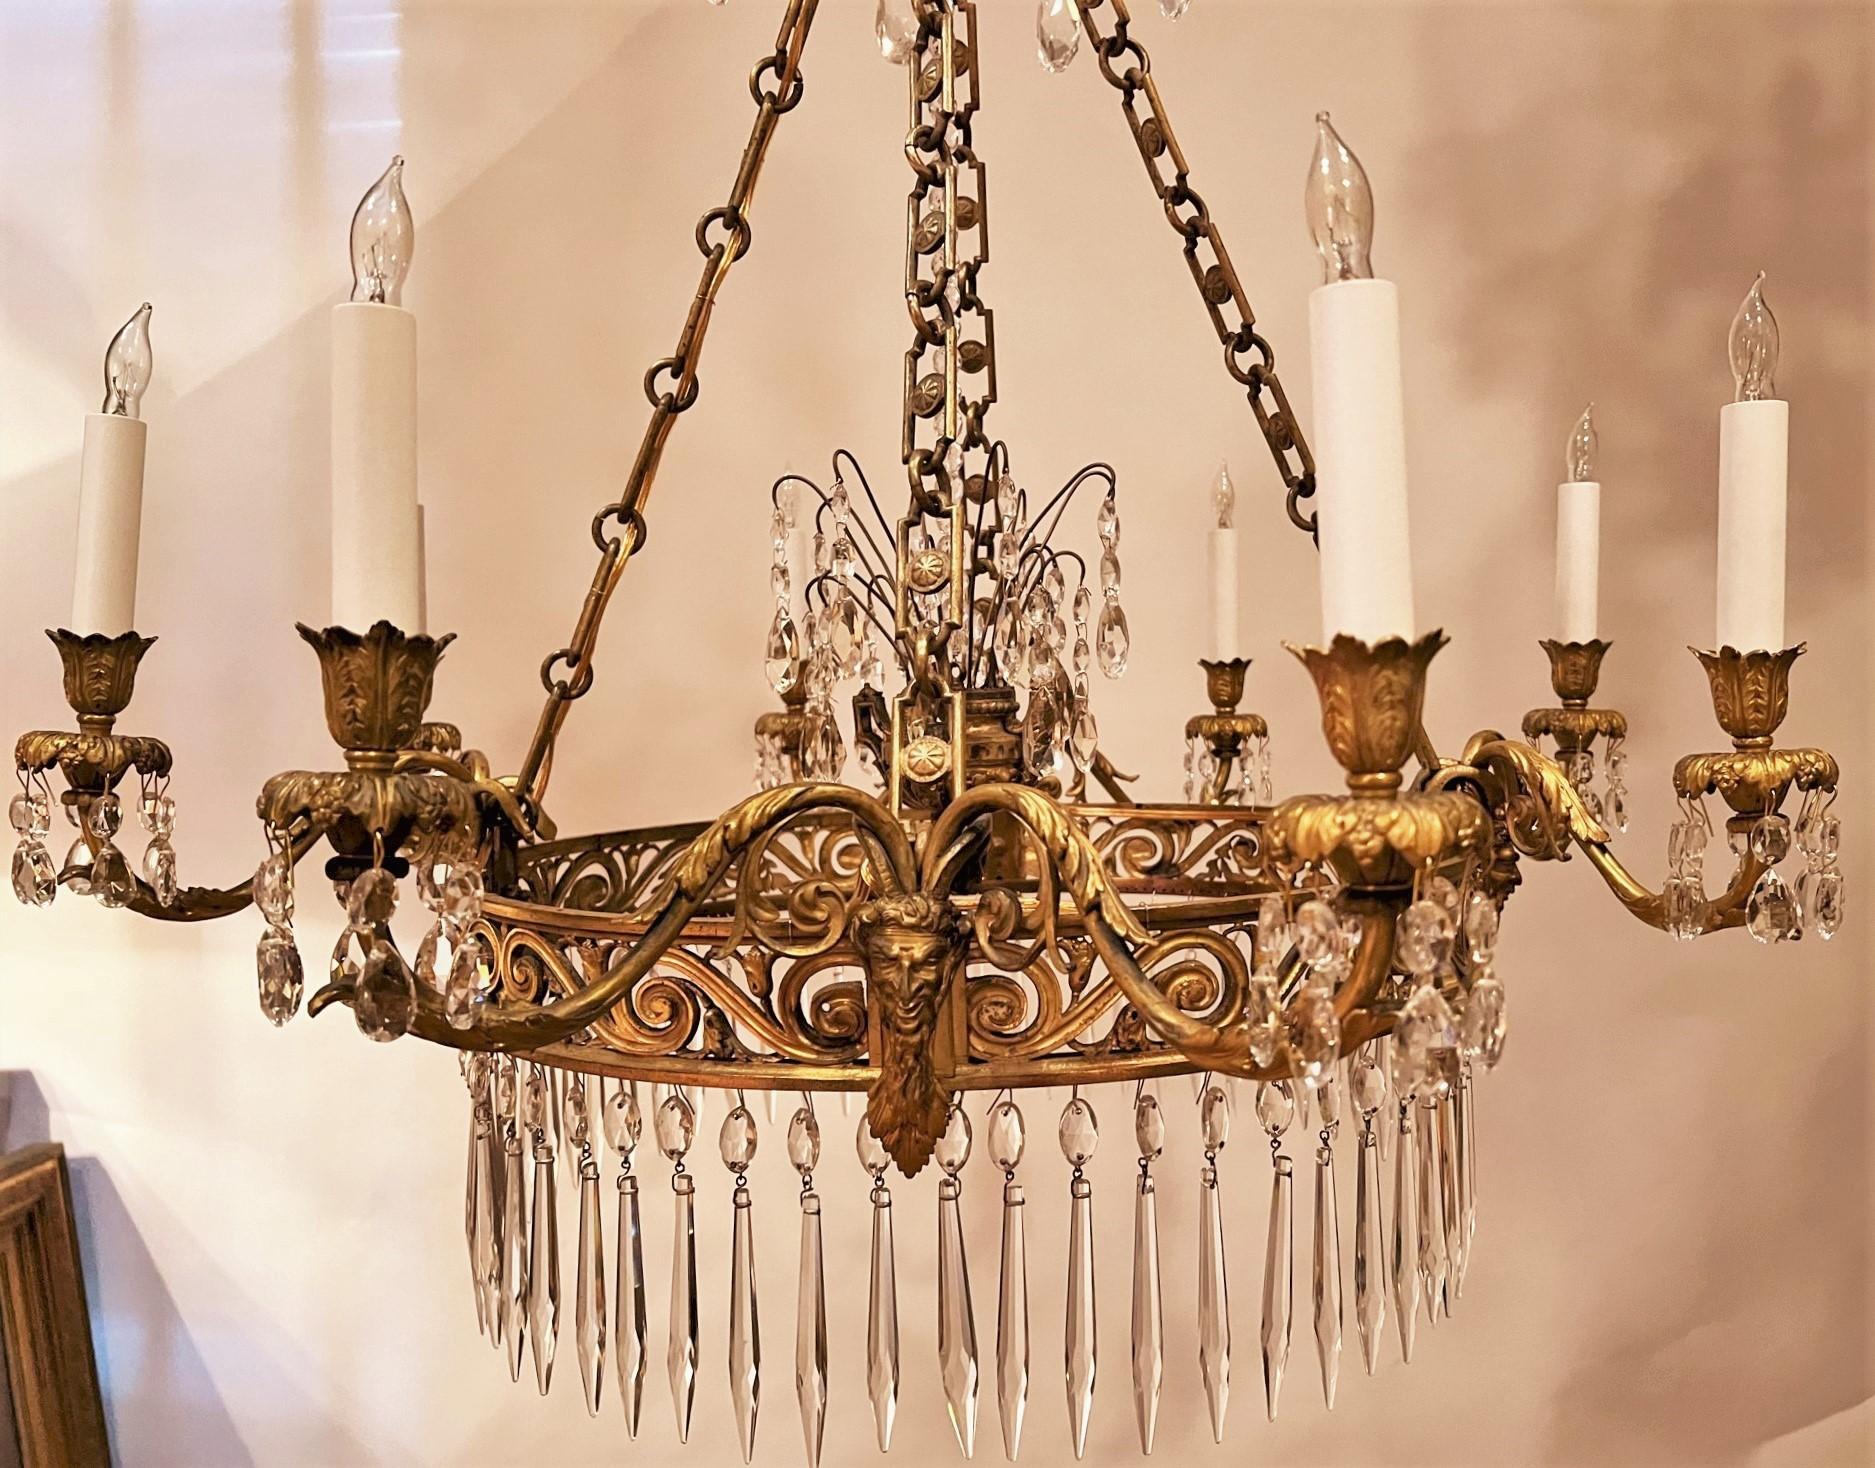 This stunningly delicate-looking 8-light chandelier is light and airy, with rich, hand-cast gilt bronze fittings that exhibit the beautiful patina of nearly 2 centuries of care and use. The hand-cut crystal prisms are period and throw off an